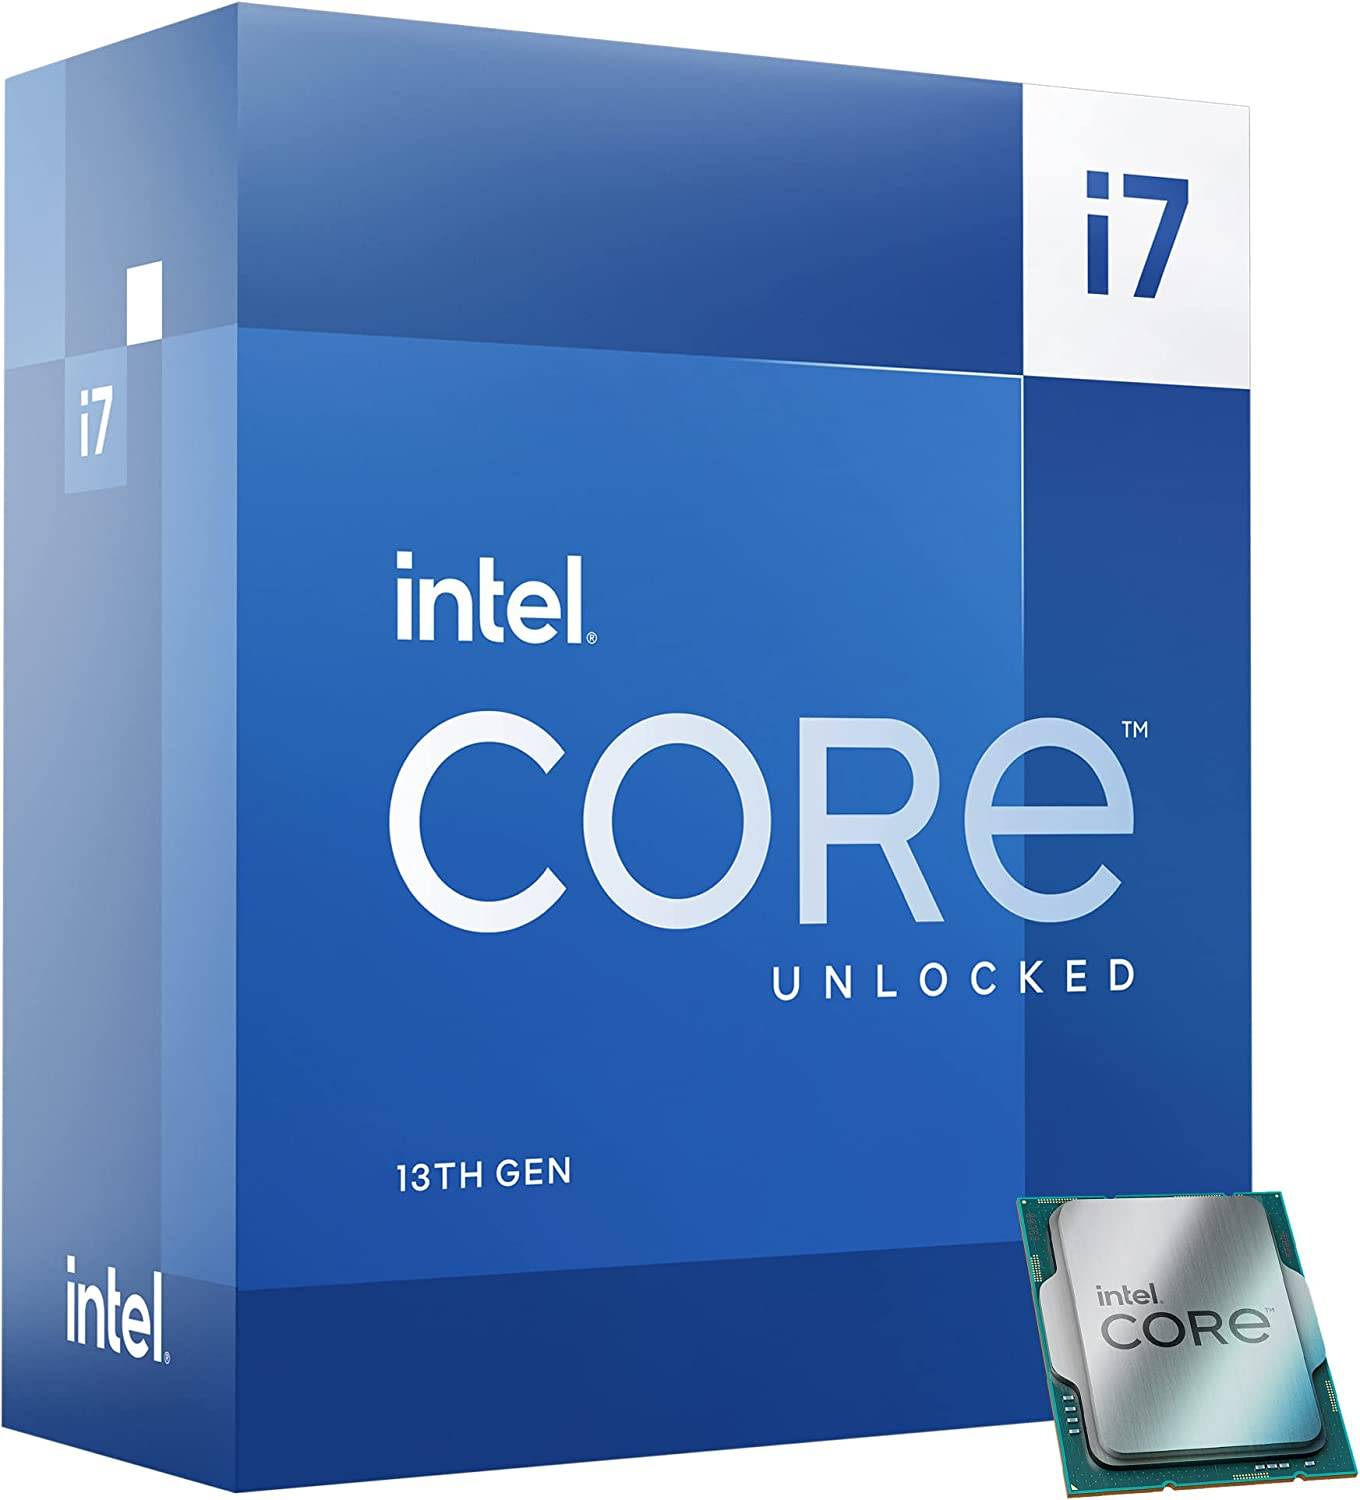 Intel Core i5-12600KF - Easy Overclock to 5.2GHz 